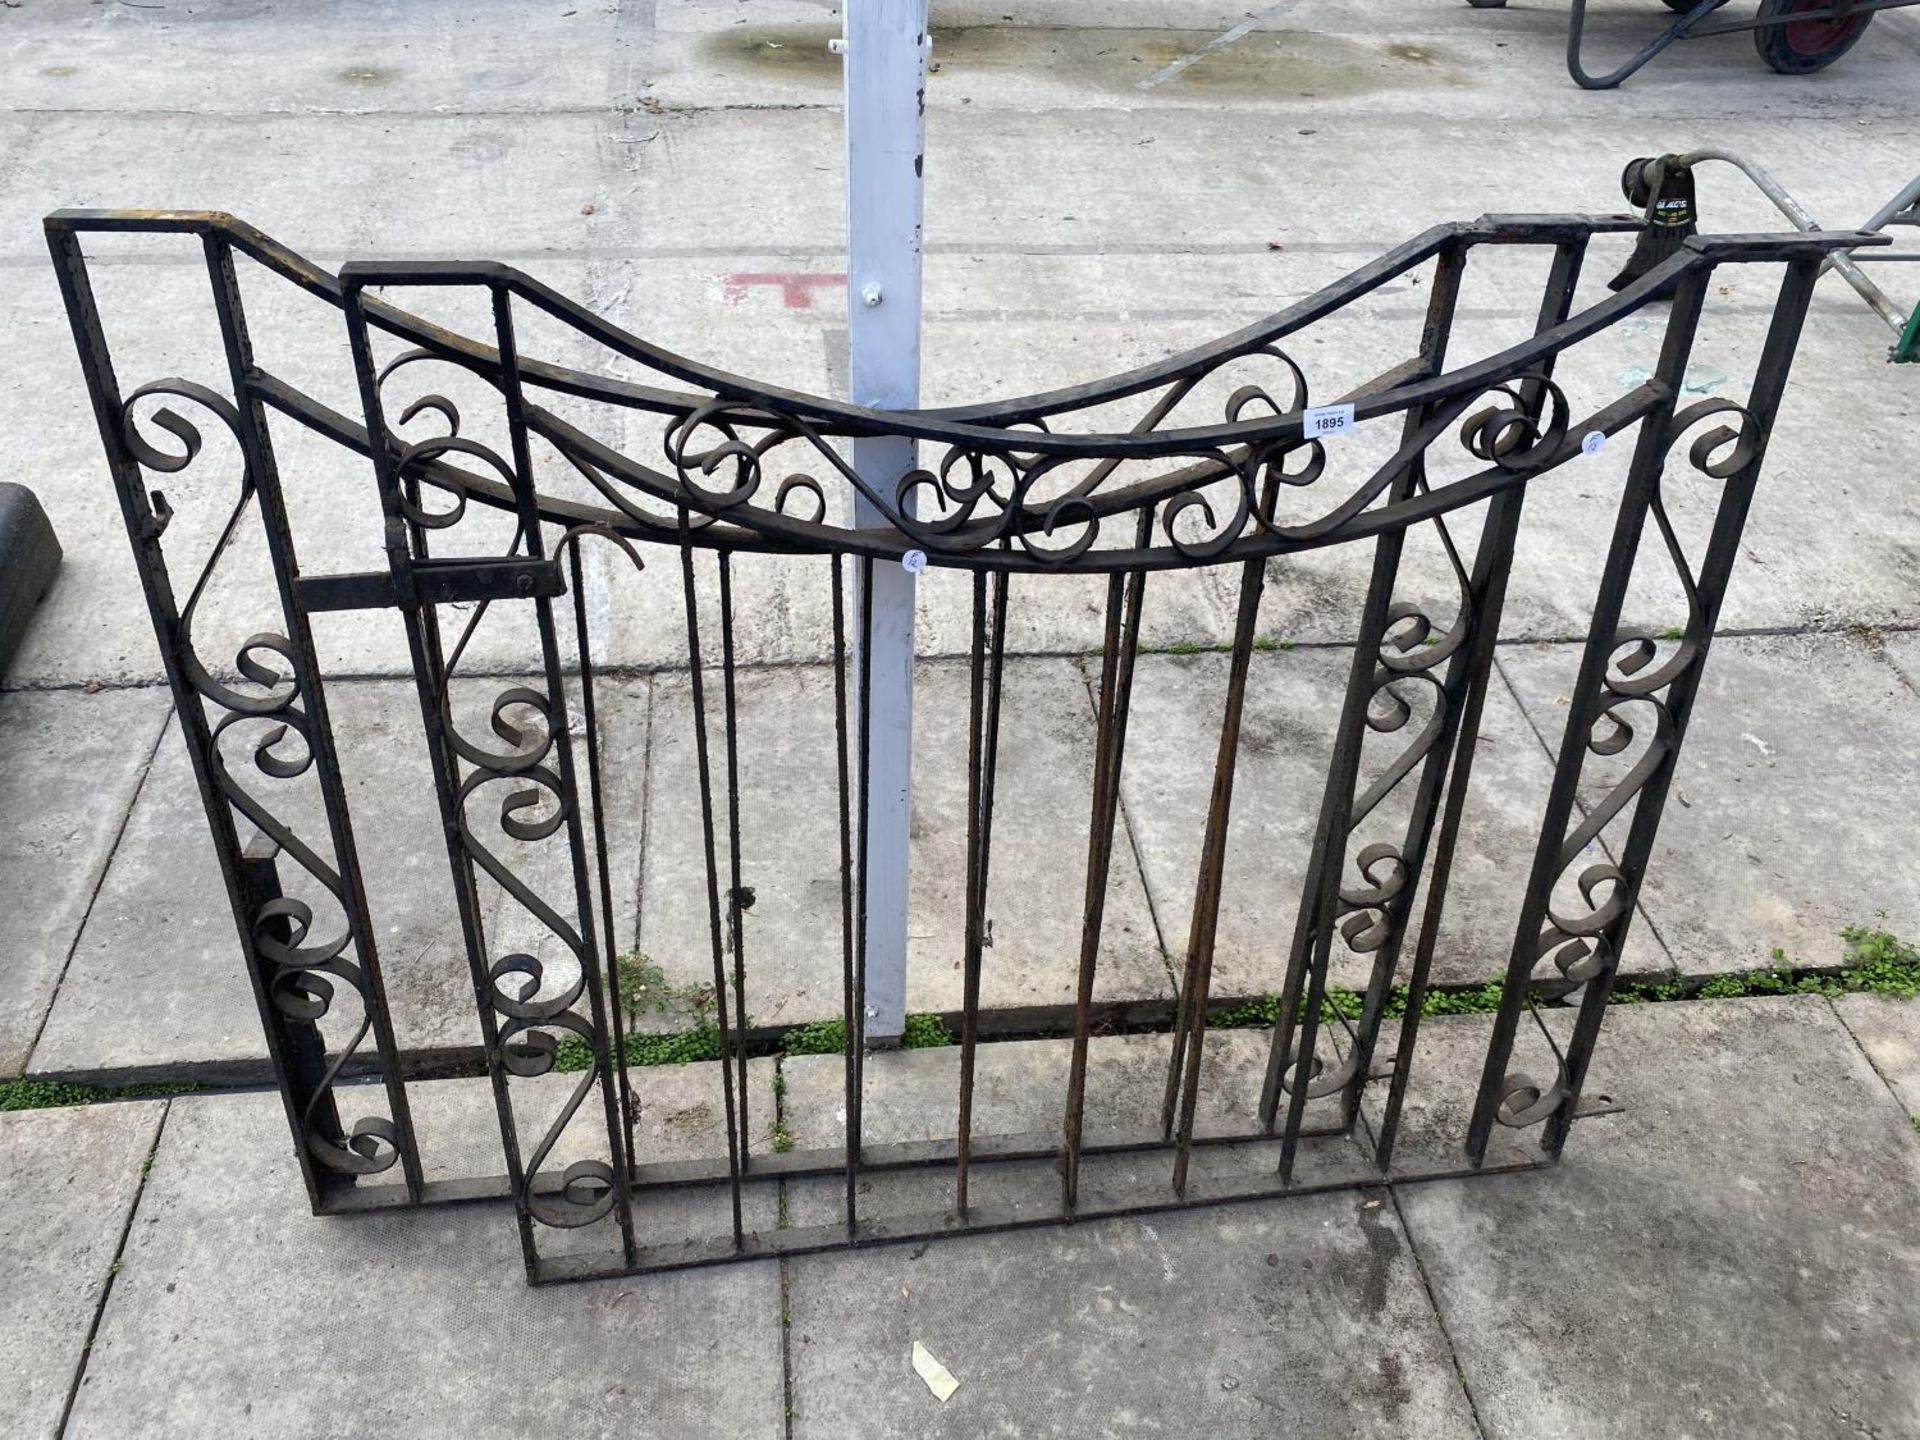 A PAIR OF DECORATIVE WROUGHT IRON GATES